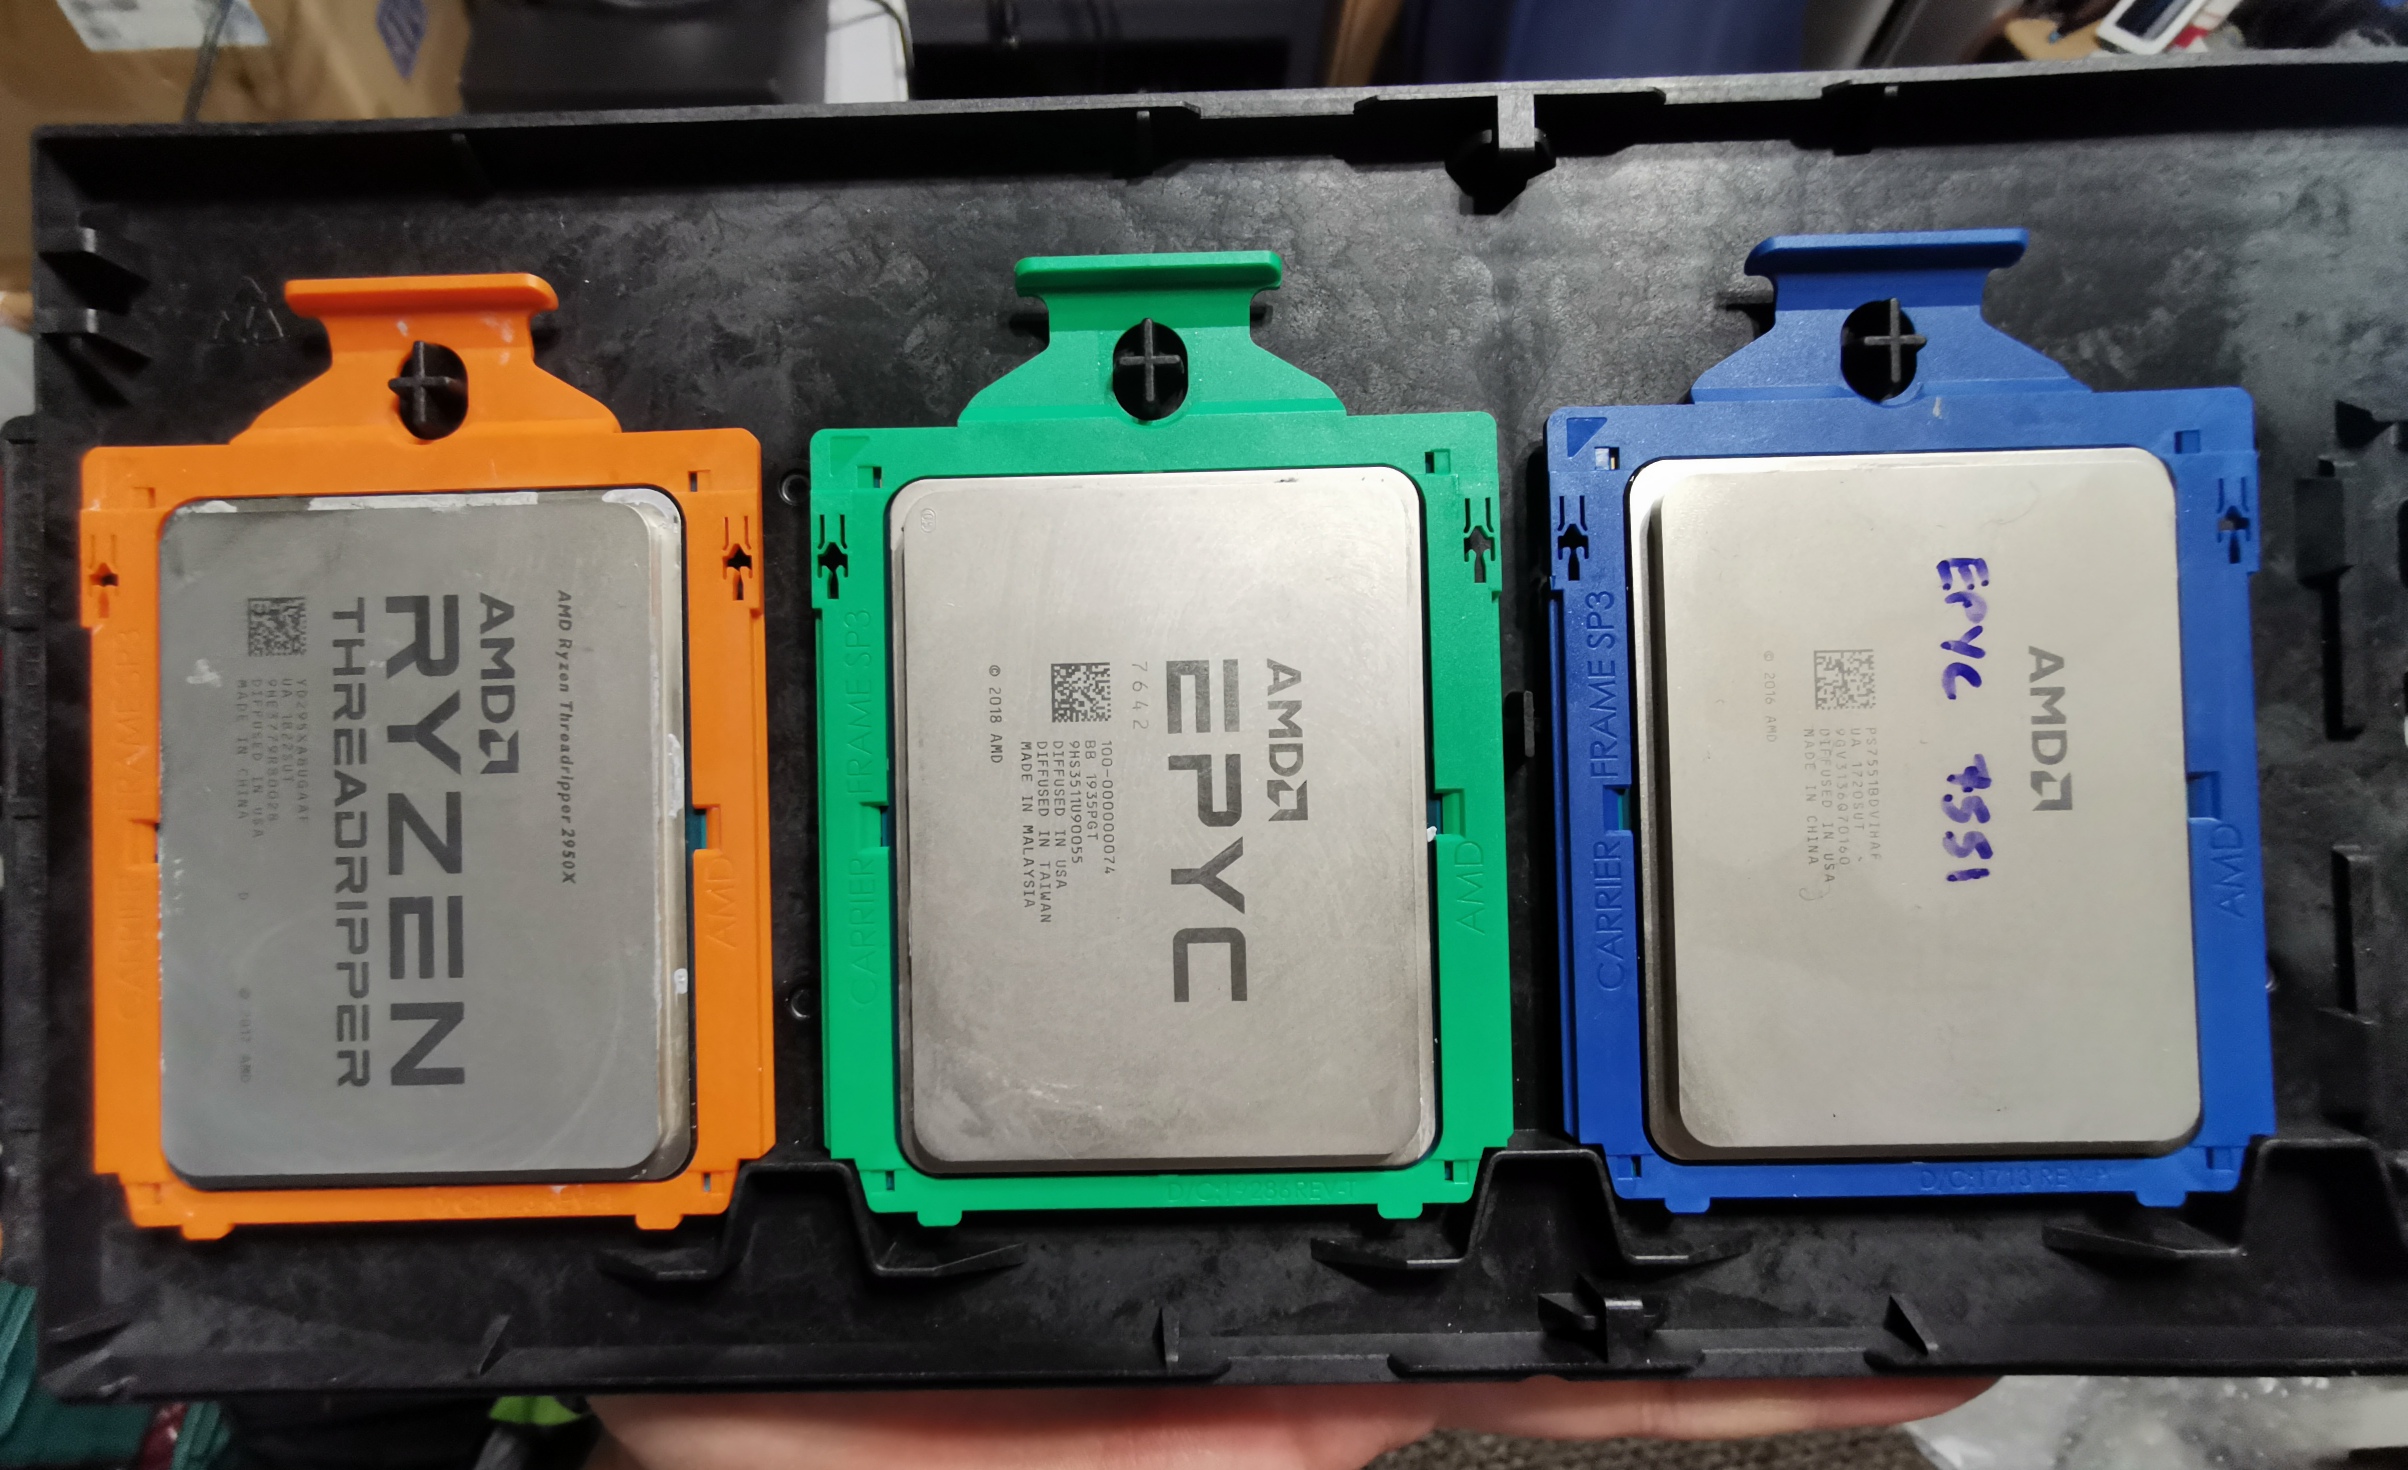 F is for Fast AMD’s New EPYC 7F52 Reviewed The F is for ᴴᴵᴳᴴ Frequency